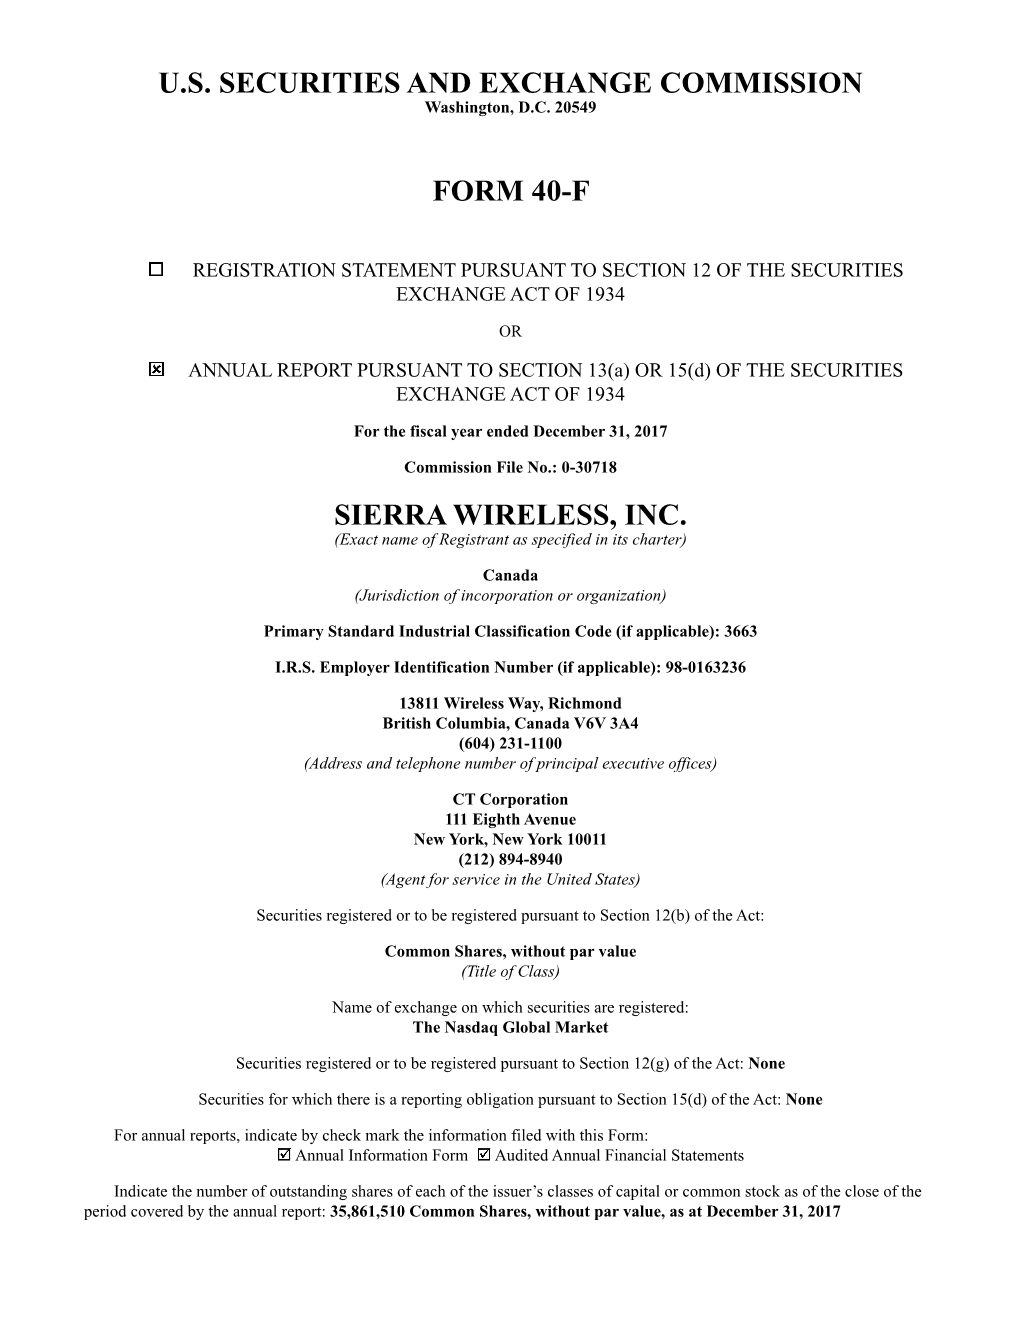 U.S. Securities and Exchange Commission Form 40-F Sierra